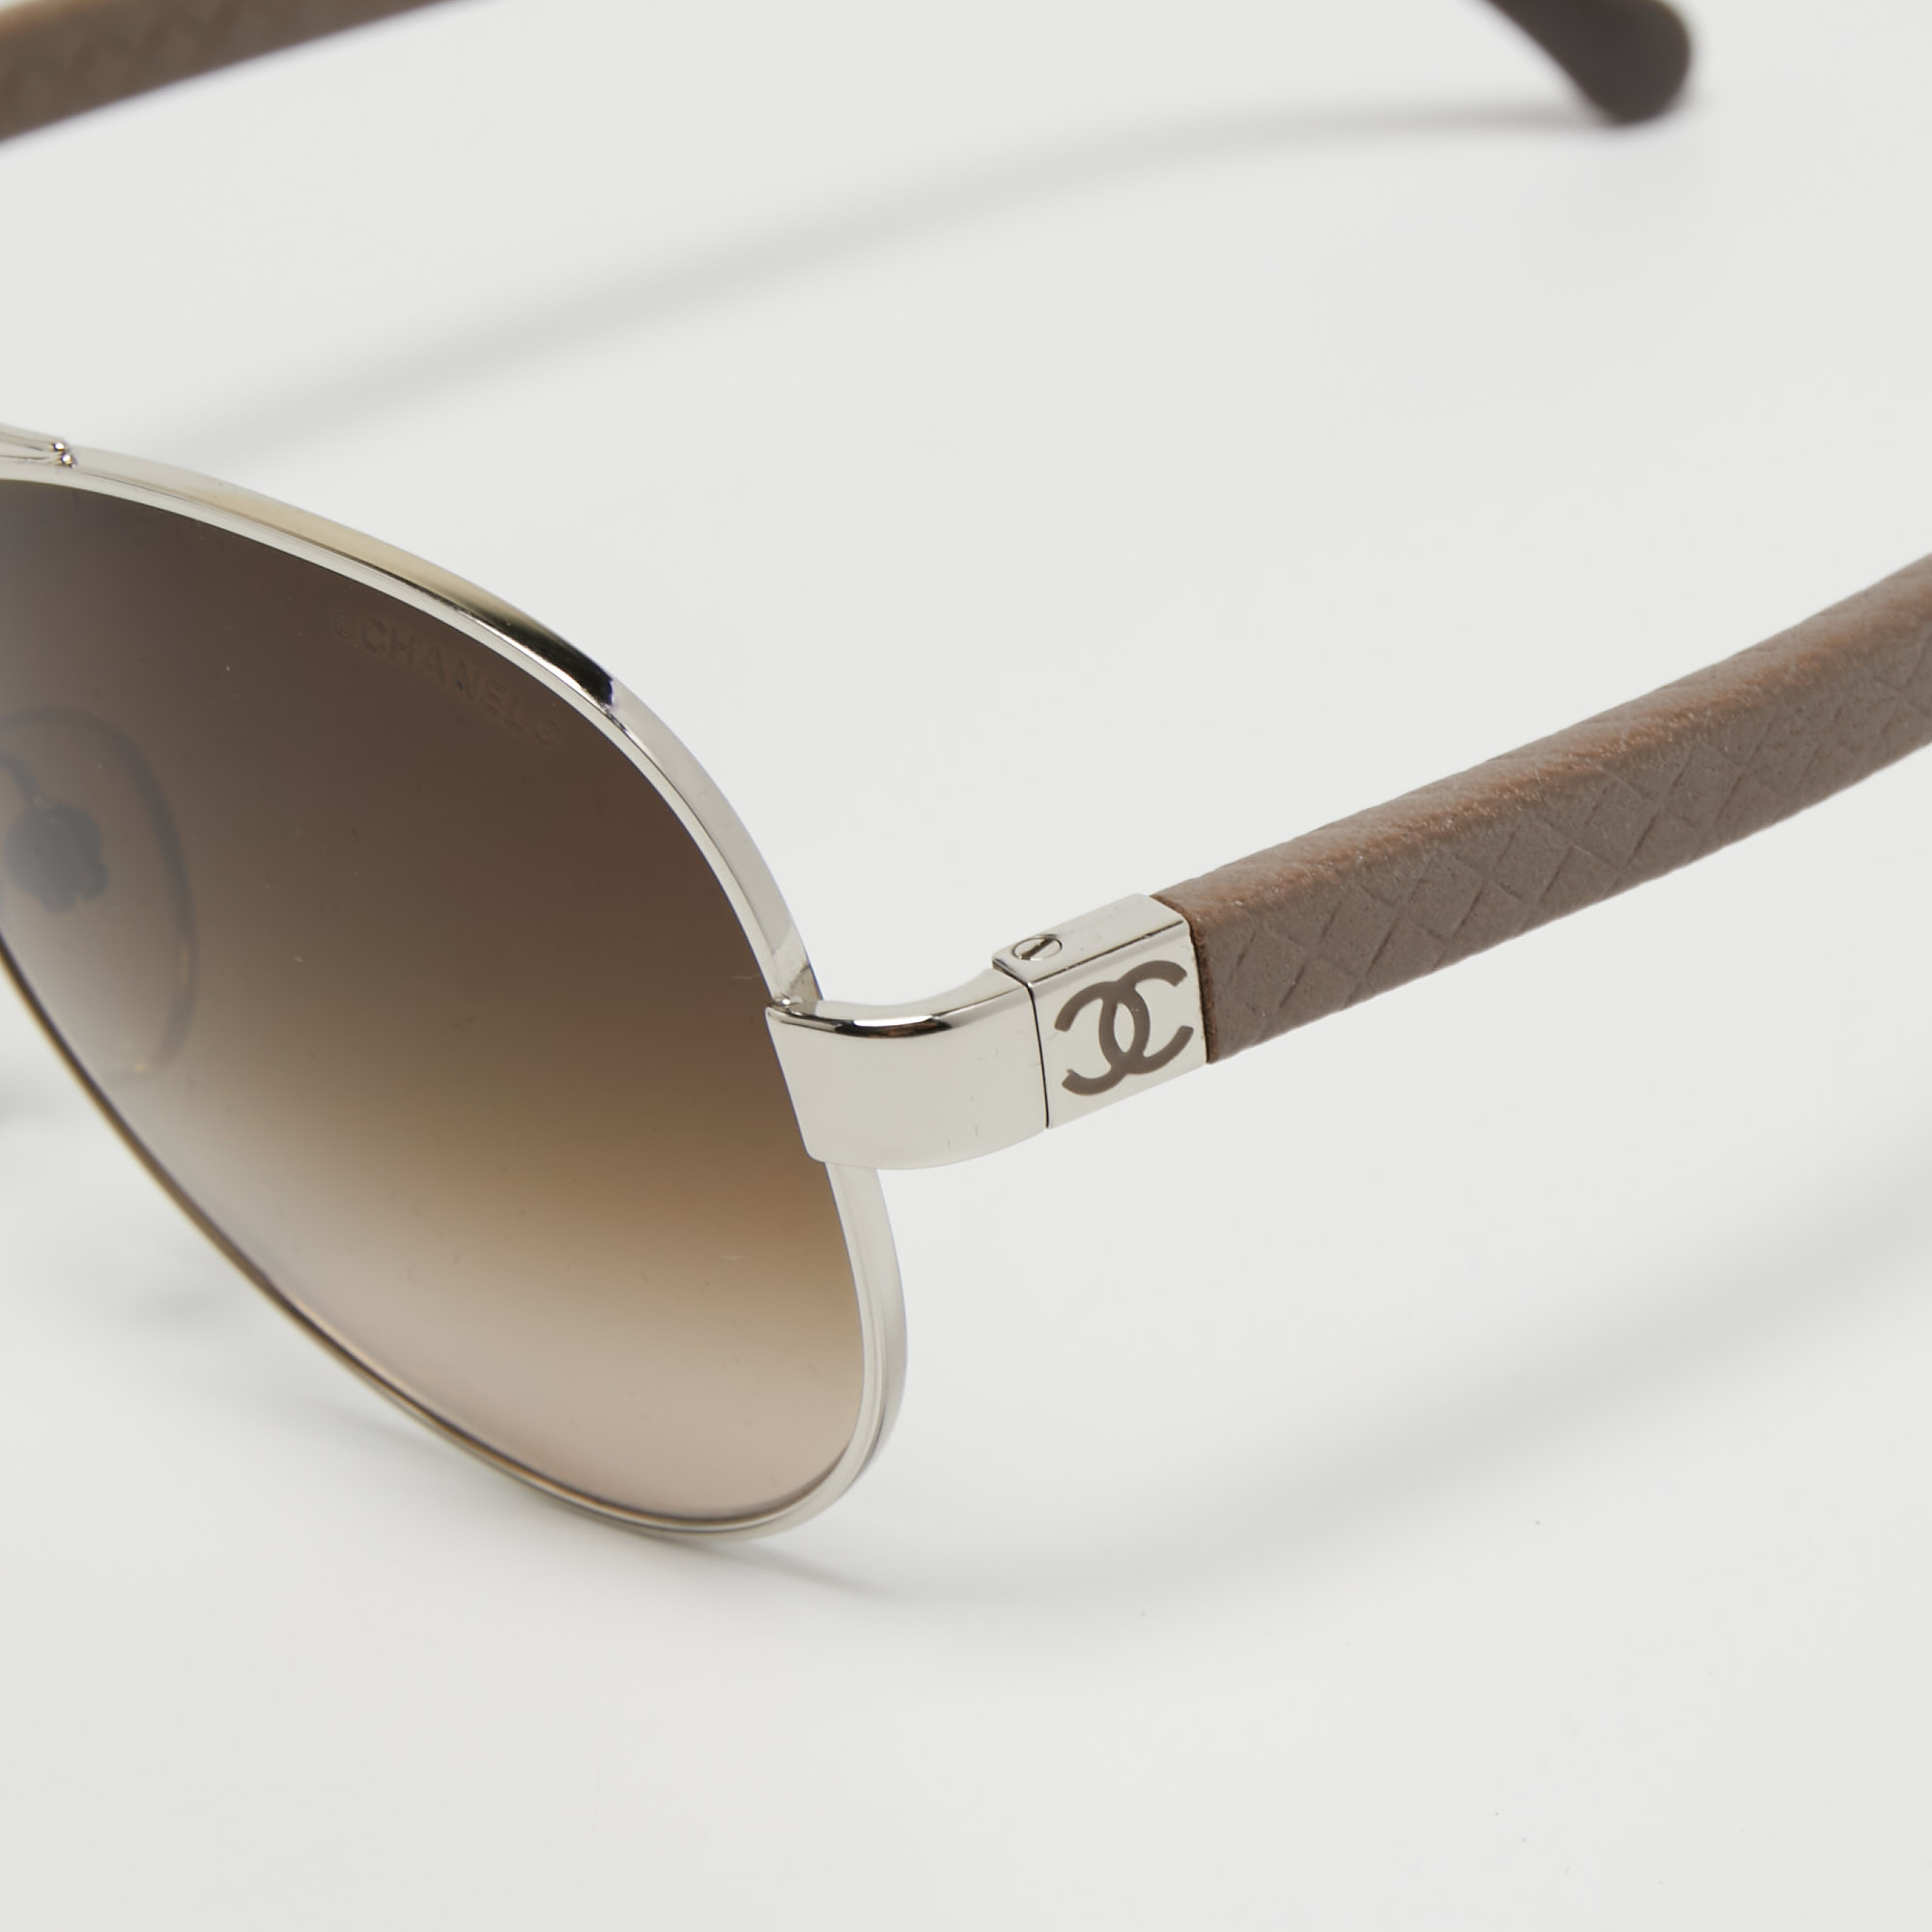 

Chanel Silver Tone/ Brown Gradient 4195-Q Quilted Aviator Sunglasses